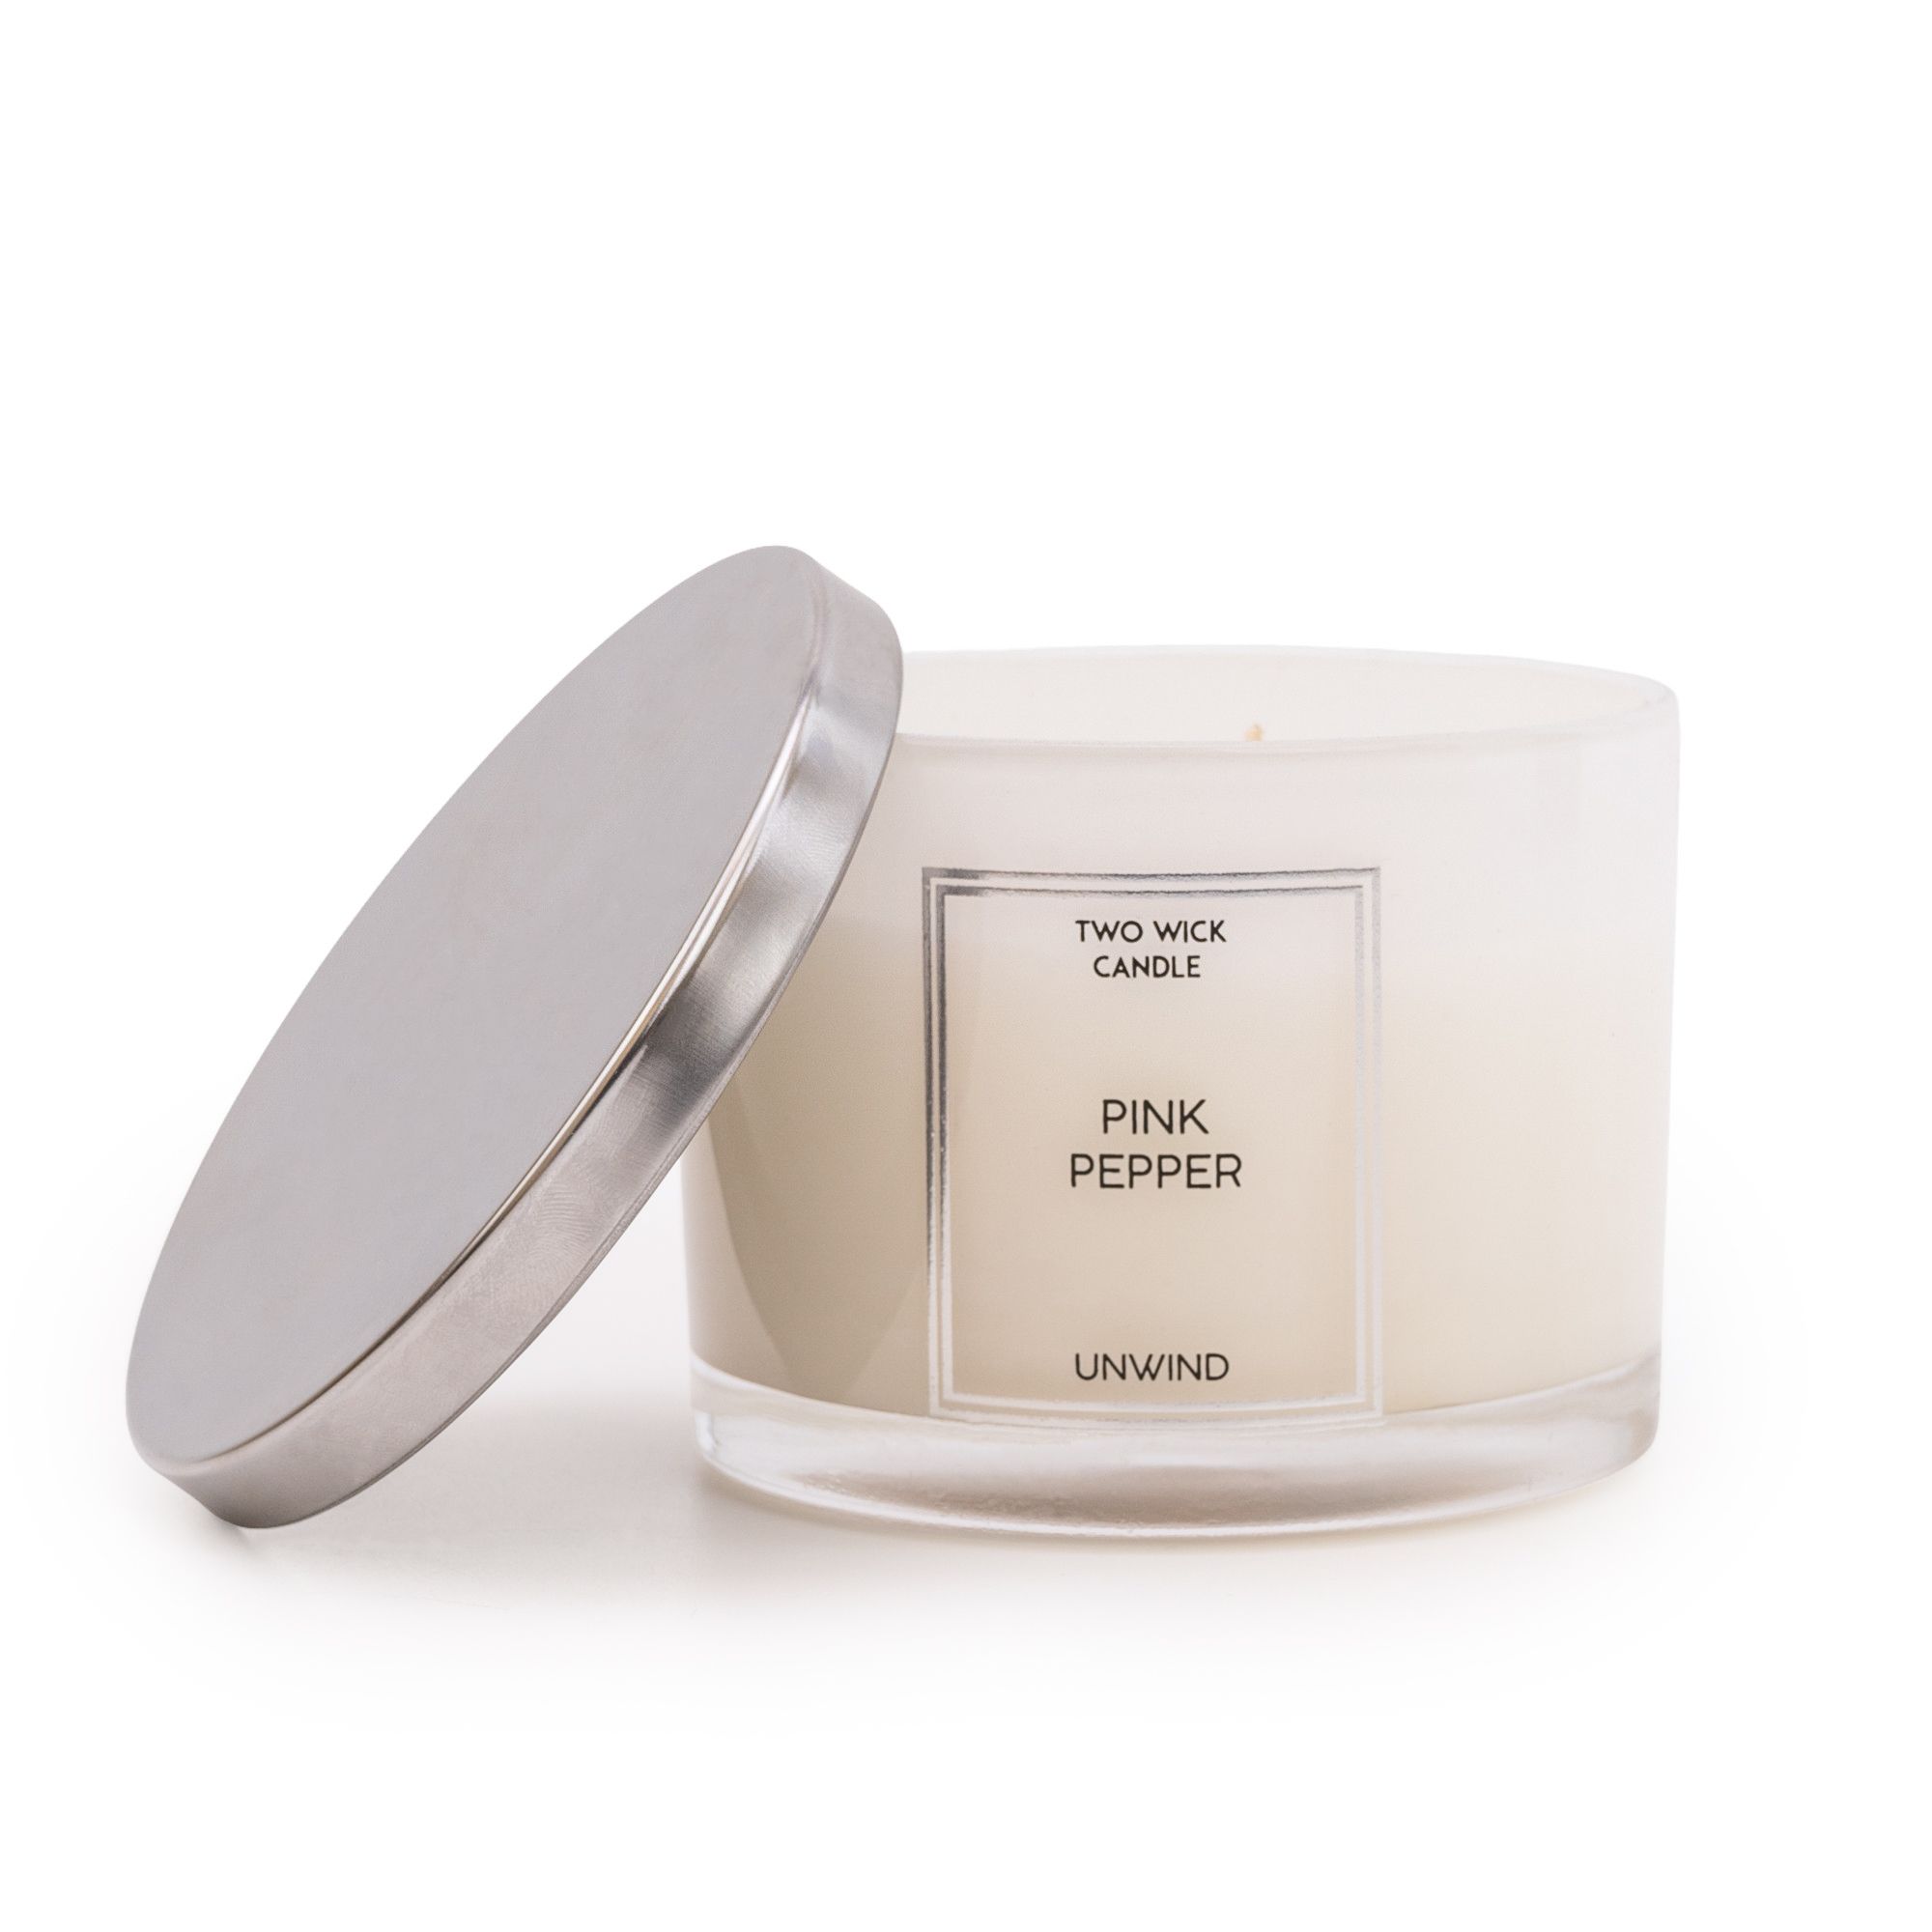 Candlelight White Pink pepper Large Scented candle, 0.64g